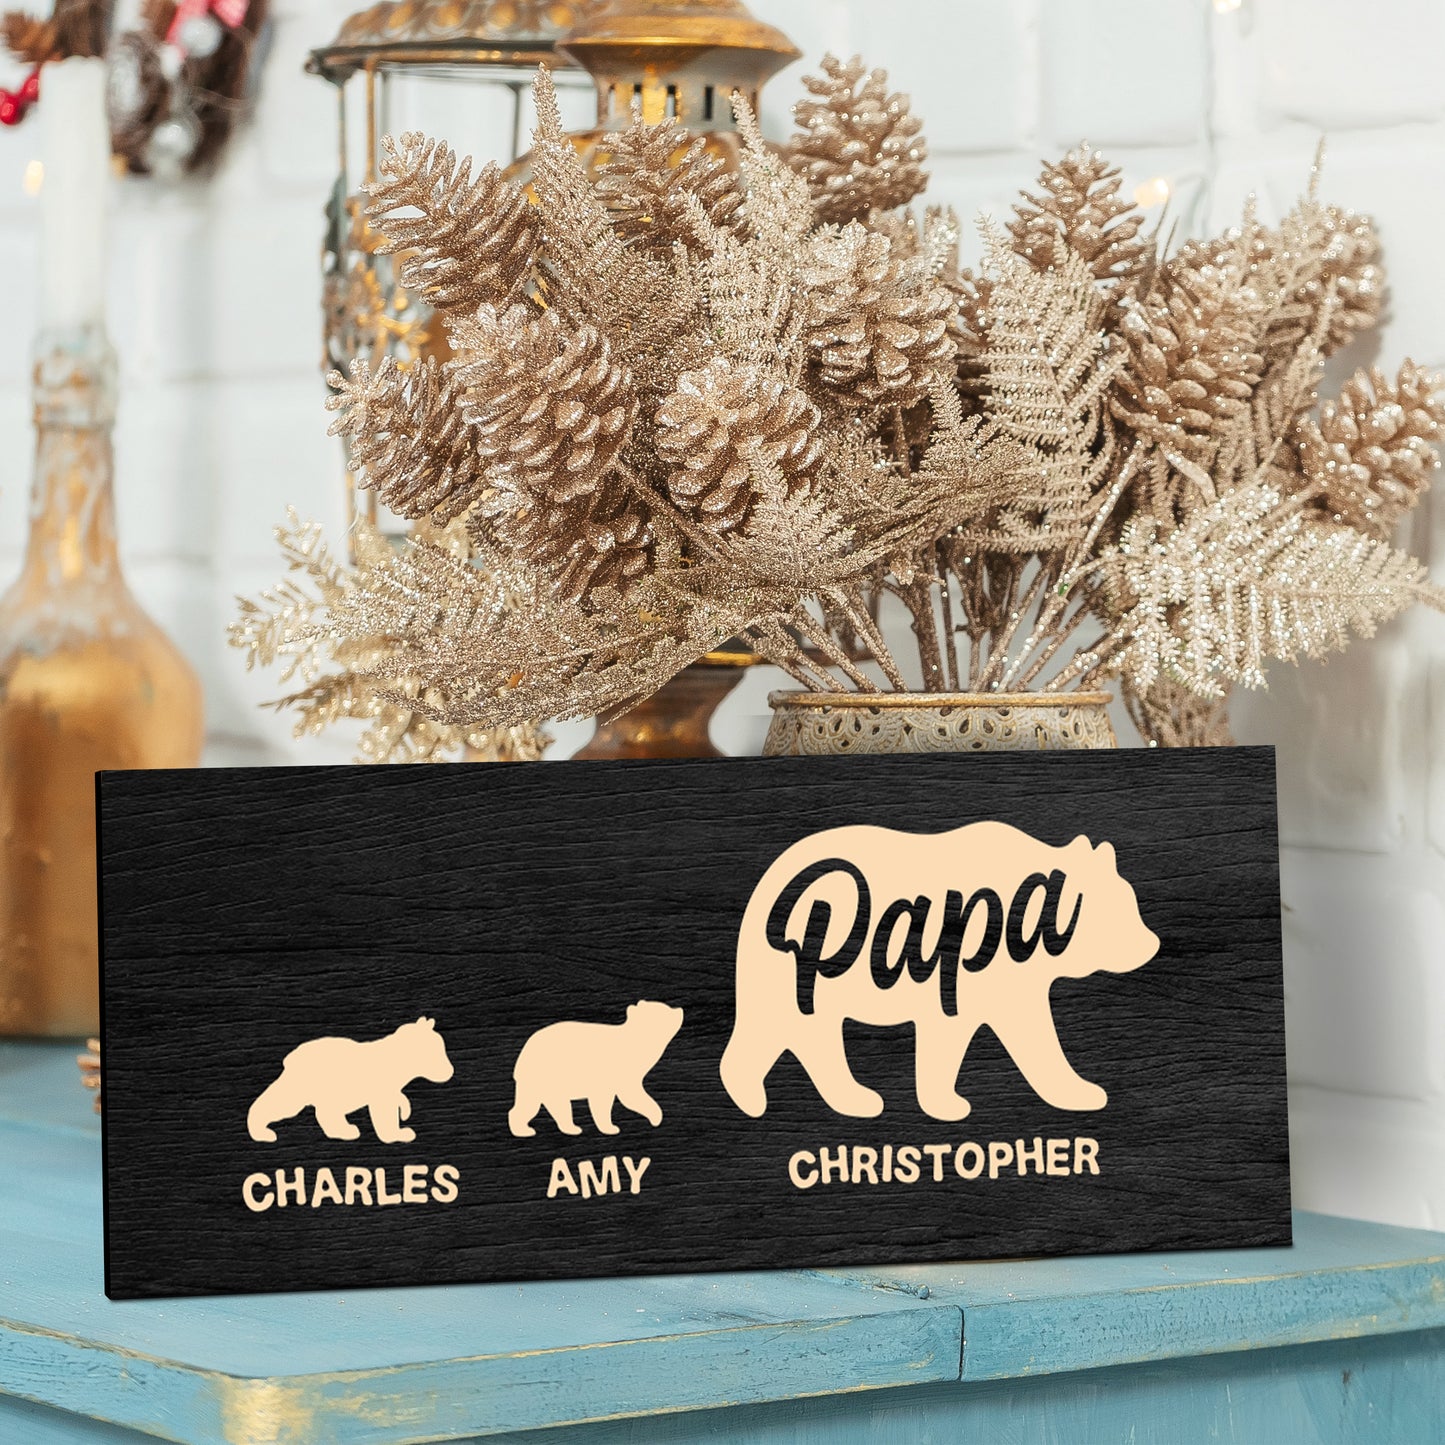 Personalized Name Wood Sign, Gifts for Dad, Dad Sign, Birthday Gift for Dad, Gifts from Daughter, Papa Bear Sign